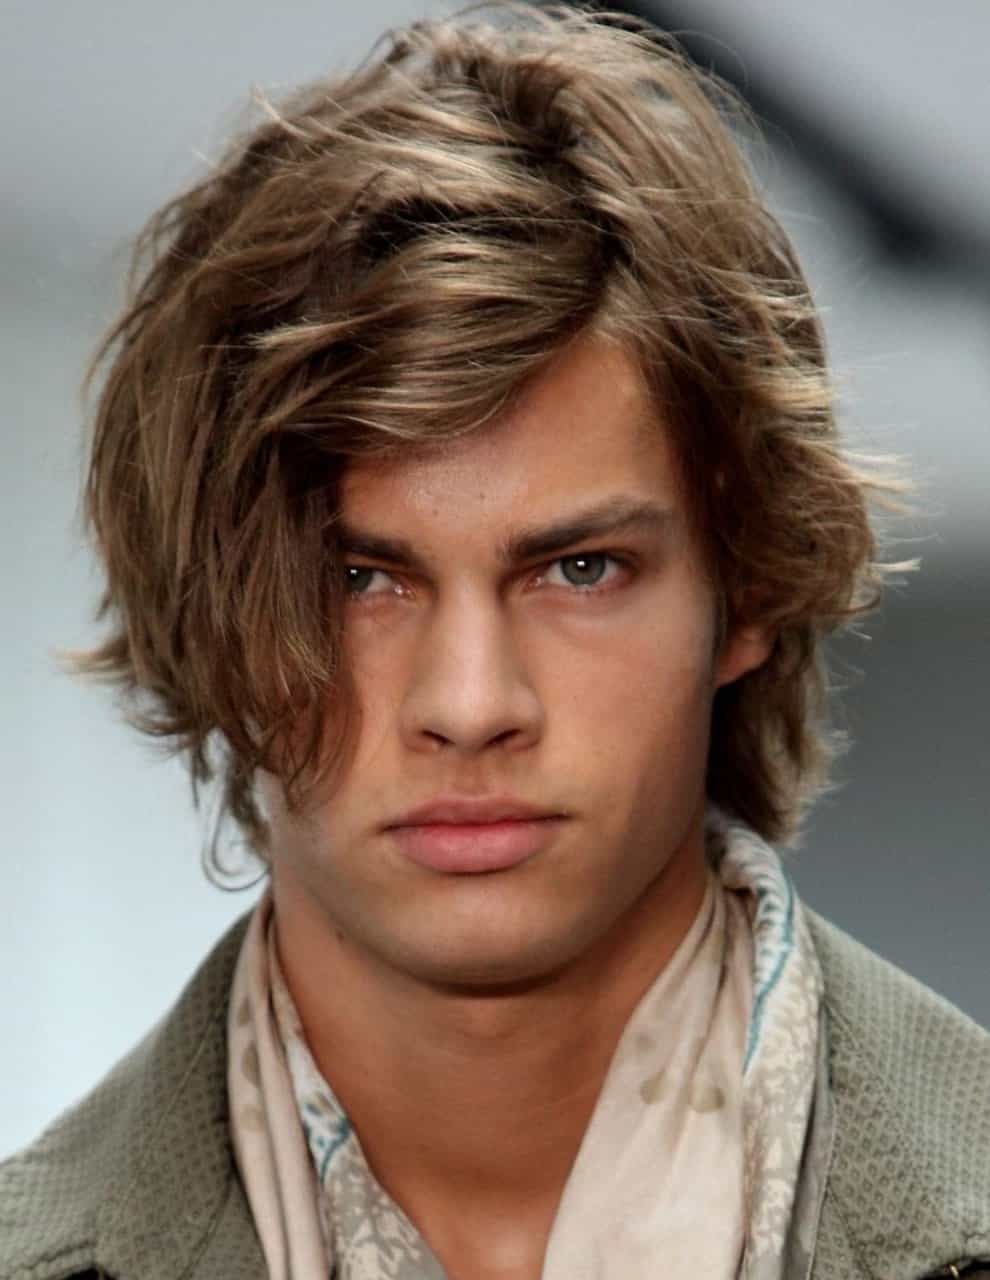 How to pick men's hairstyle for round face